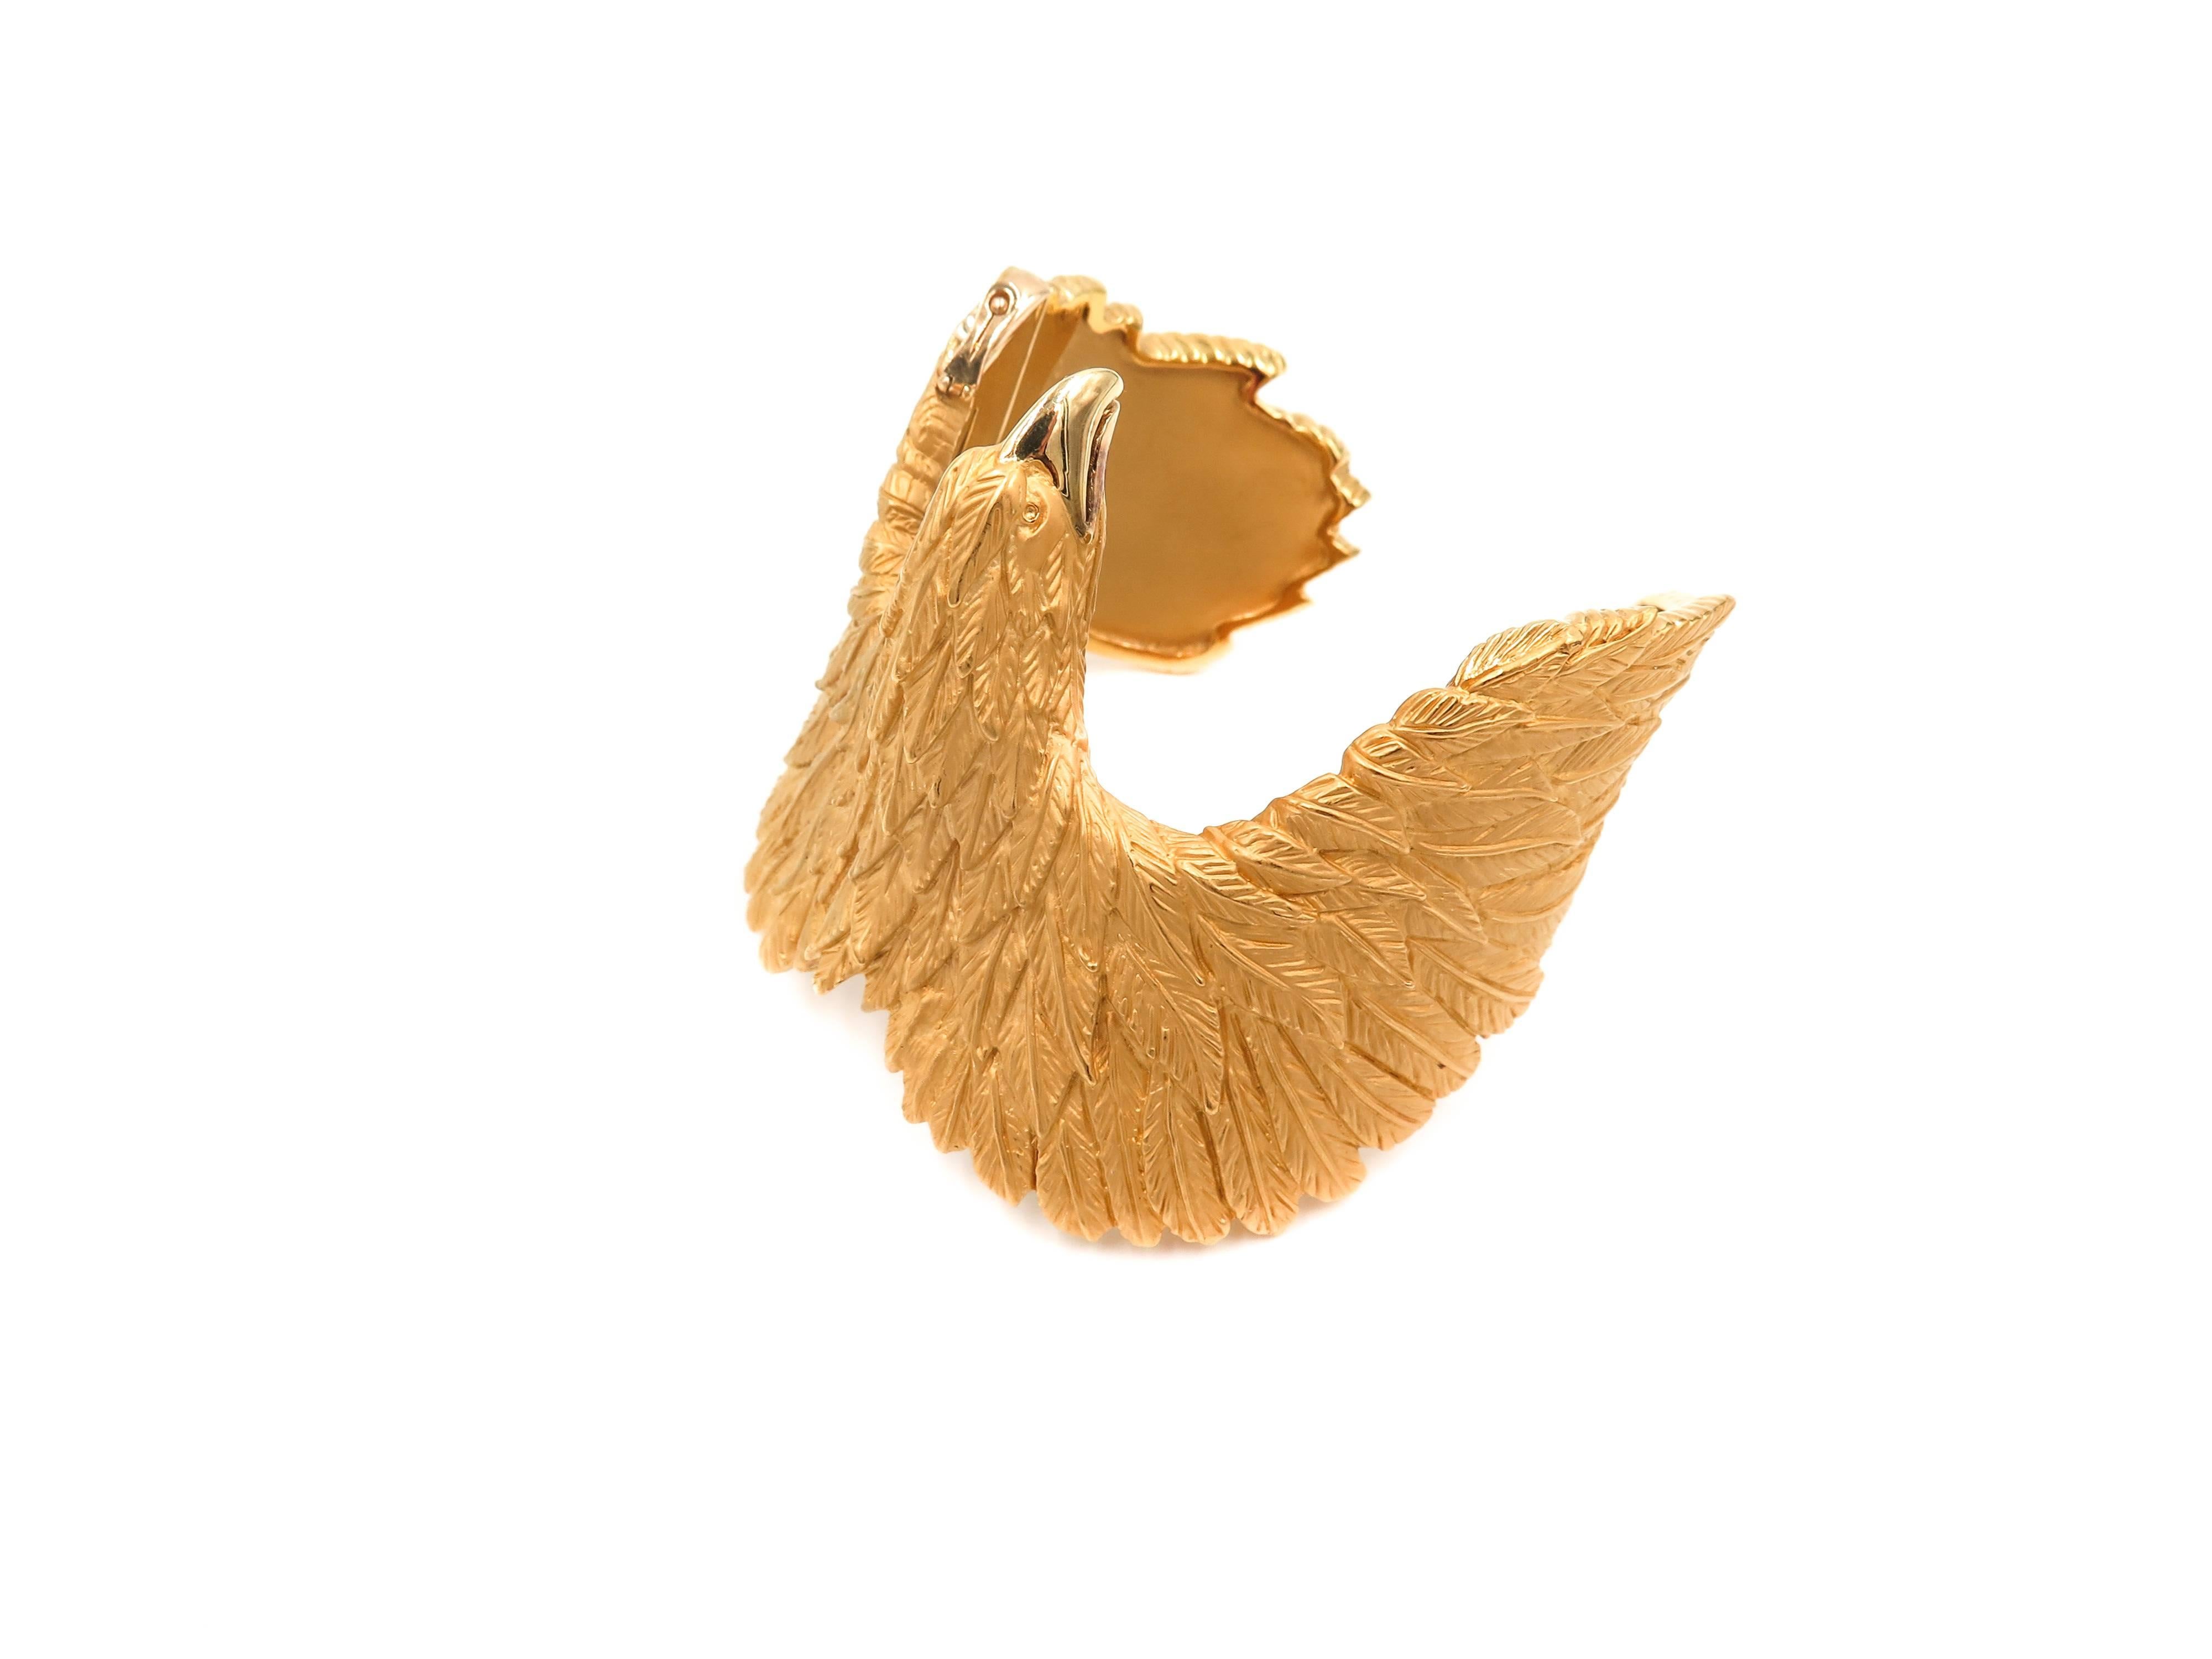 The strength, character, and life-force of the animal kingdom are captured by Carrera y Carrera artisans to create this beautiful jewel dripping with energy and vitality.
This Amazing Eagle Cuff Bracelet handcrafted in 18k yellow gold, weighing 6.23